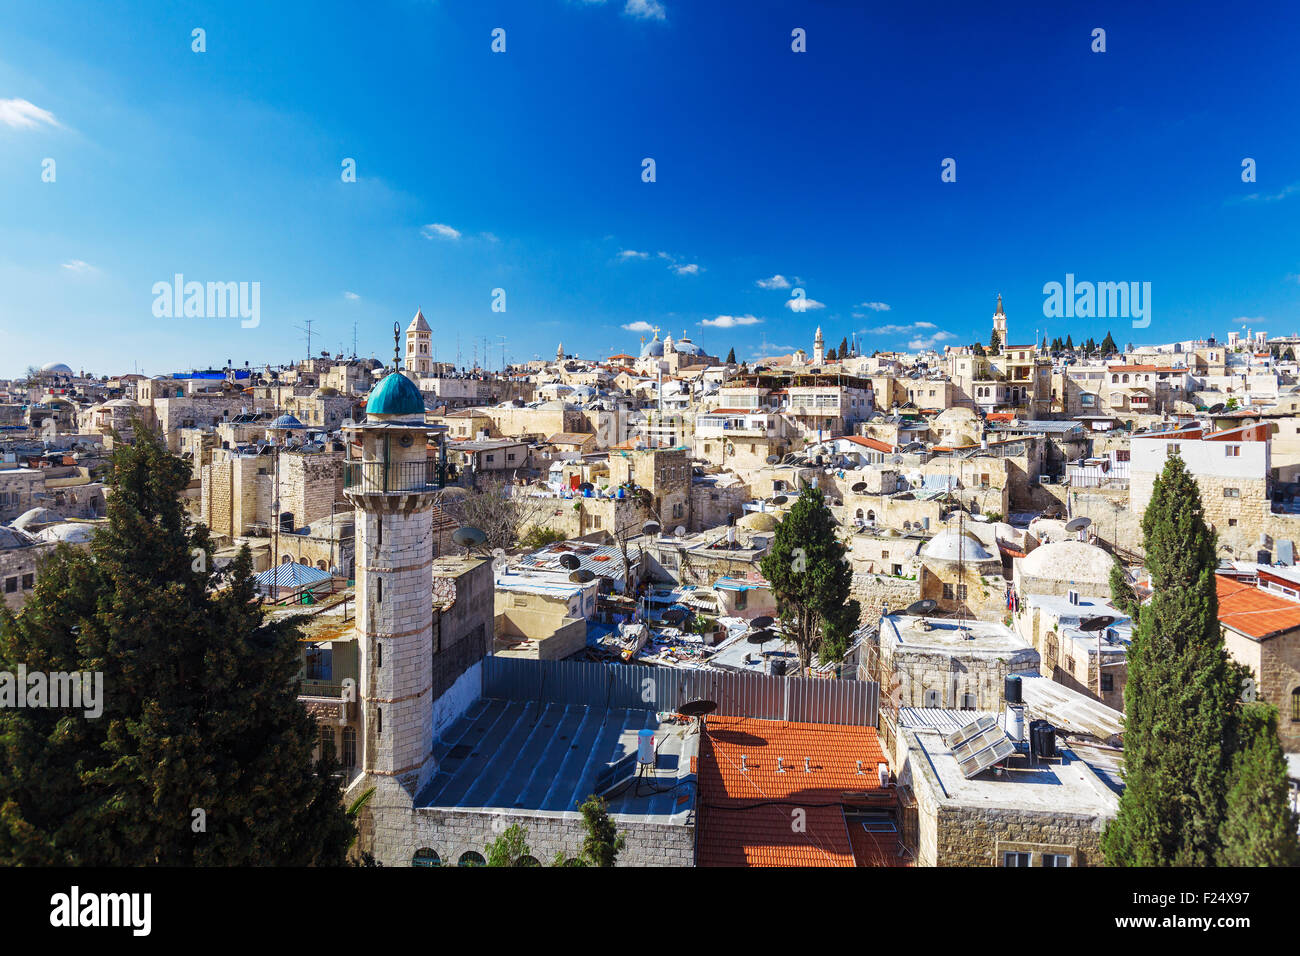 Roofs of Old City with Holy Sepulcher Church Dome, Jerusalem, Israel Stock Photo